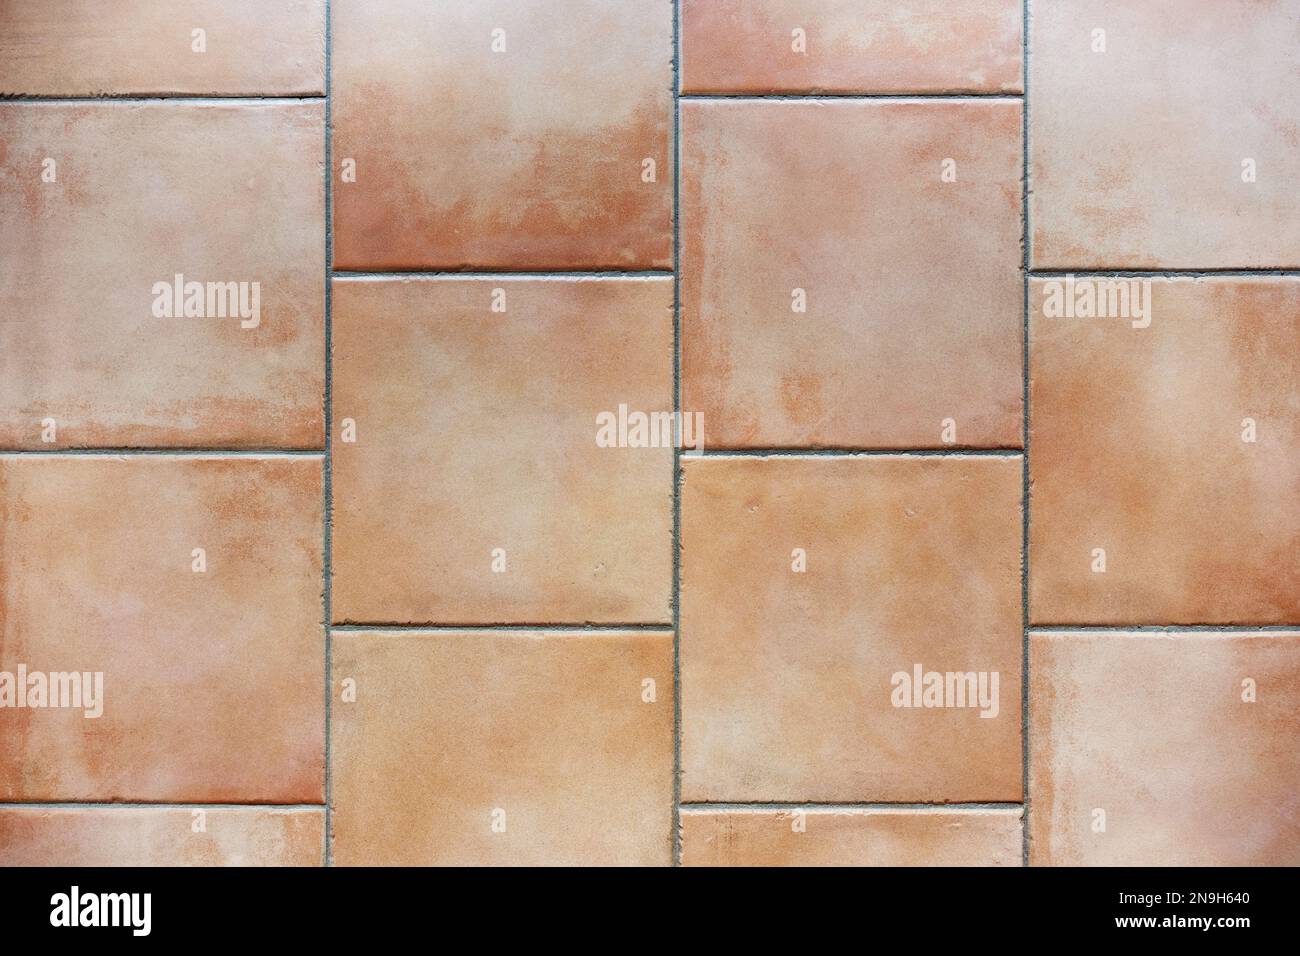 Tiled floor with natural terracotta ceramic tiles and gray grout, background texture, indoor architecture concept, copy space, high angle view from ab Stock Photo